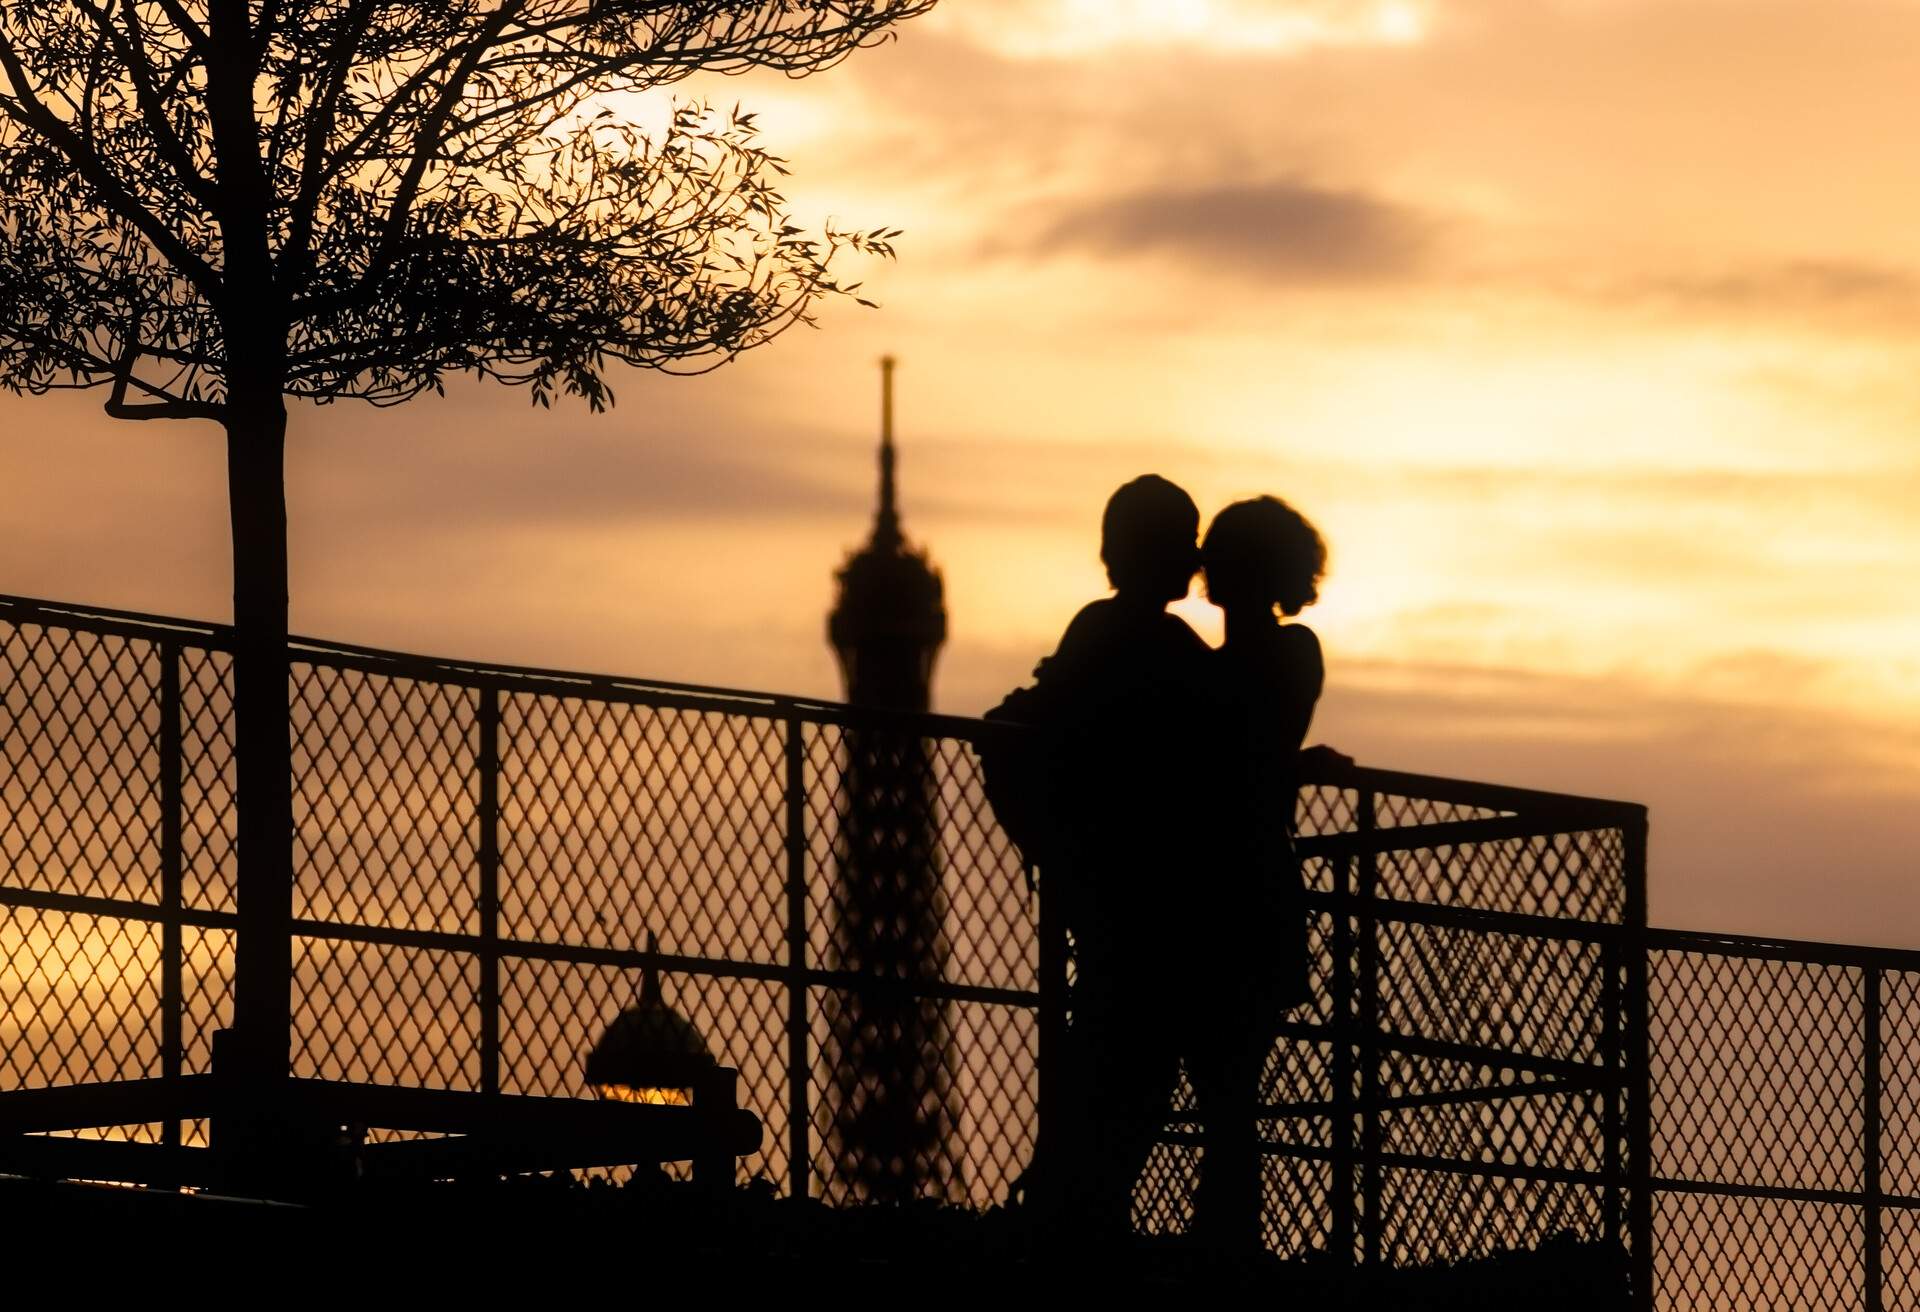 Young couple silhouette against sunset with the Eiffel tower in the background in Paris, France